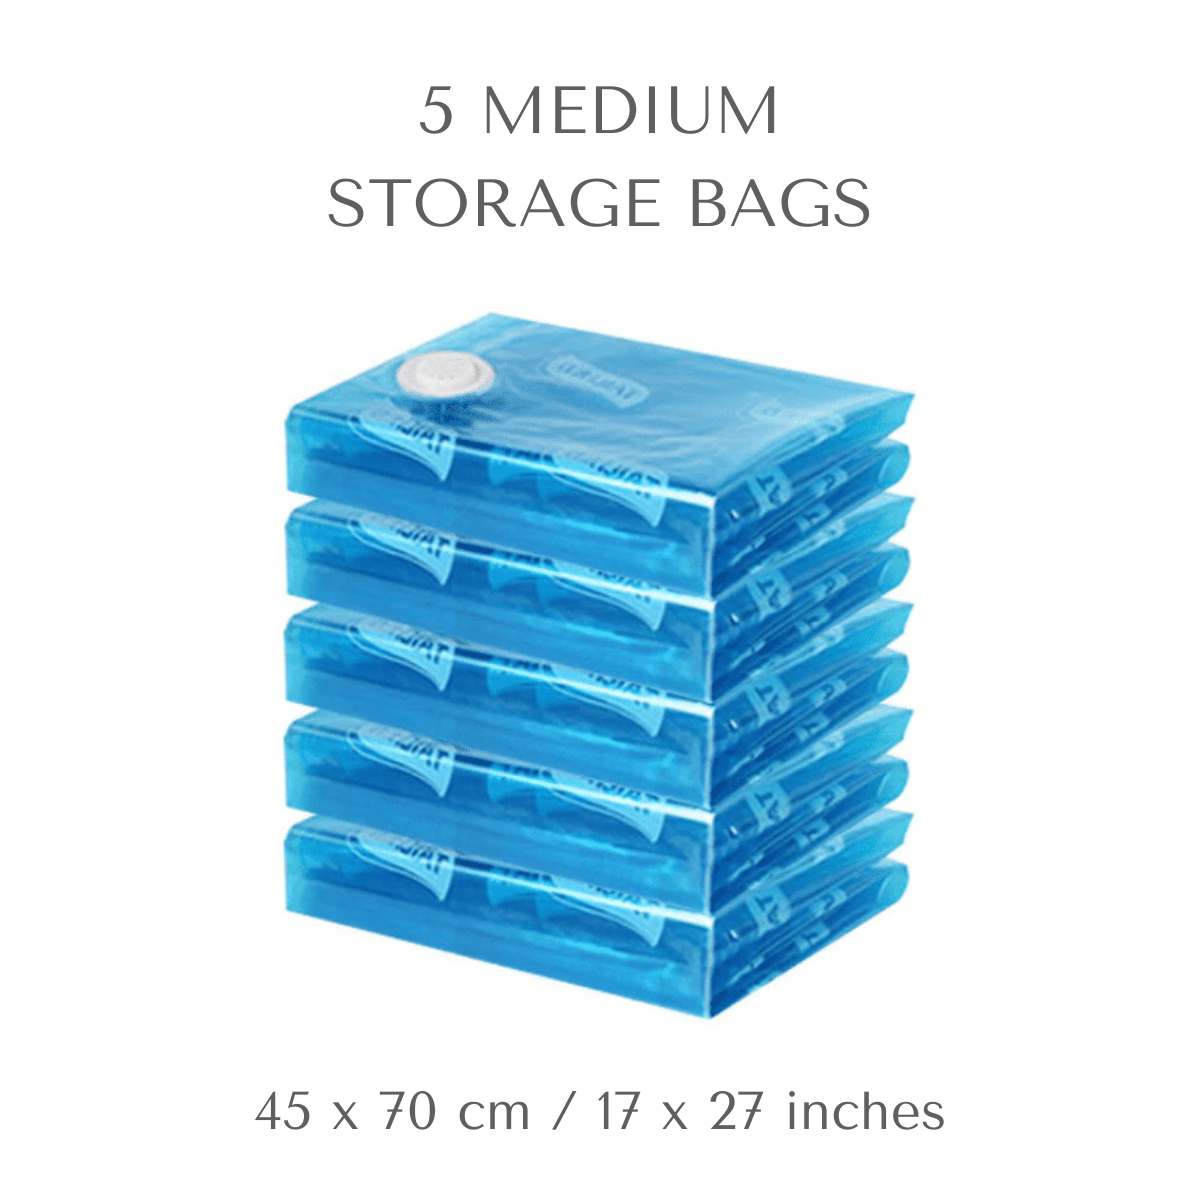 4pcs/set Vacuum Compression Storage Bags (1 Extra Large, 1 Medium, 1 Small,  1 Manual Pump), Space Saver Sealing Bags With Dual Zipper For Clothes,  Quilts, Travel Luggage, Bedding, Etc.